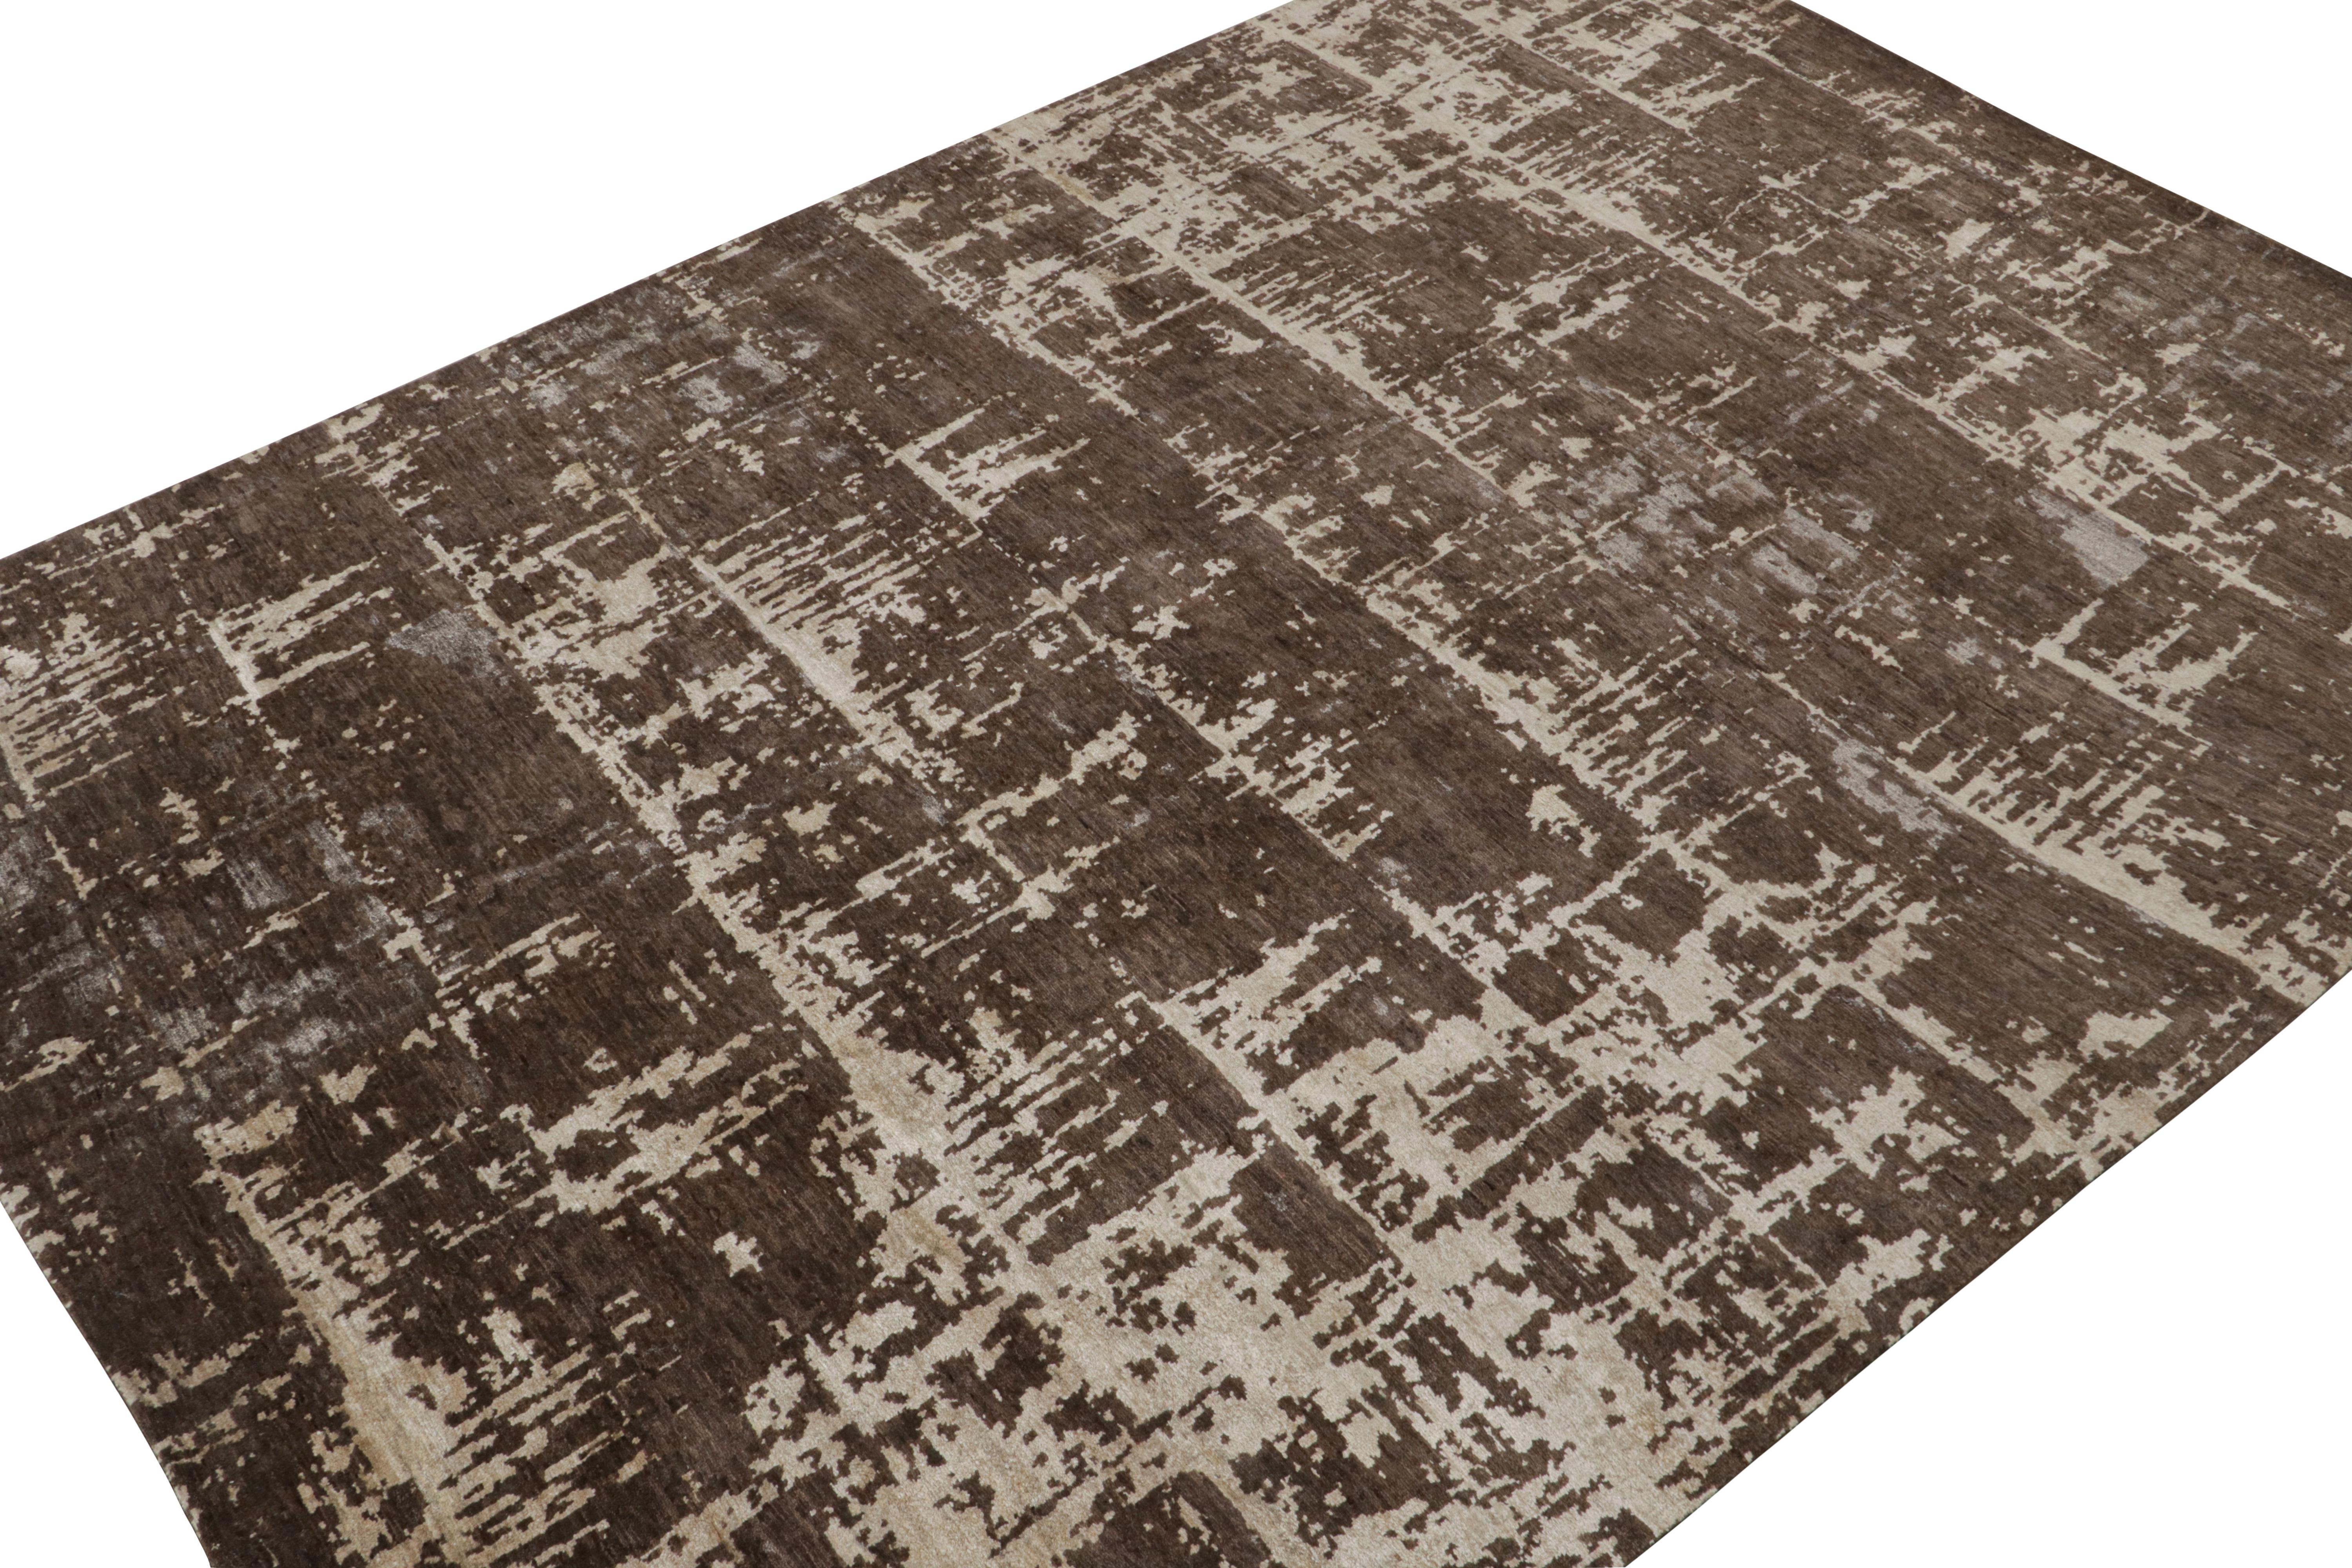 Hand-knotted in wool, silk and cotton, a 10x14 abstract rug from Rug & Kilim’s Modern collection.

On the Design: 

This rug enjoys a painterly, expressive pattern in rich brown, silver-gray and off-white tones. Connoisseurs will admire the bold